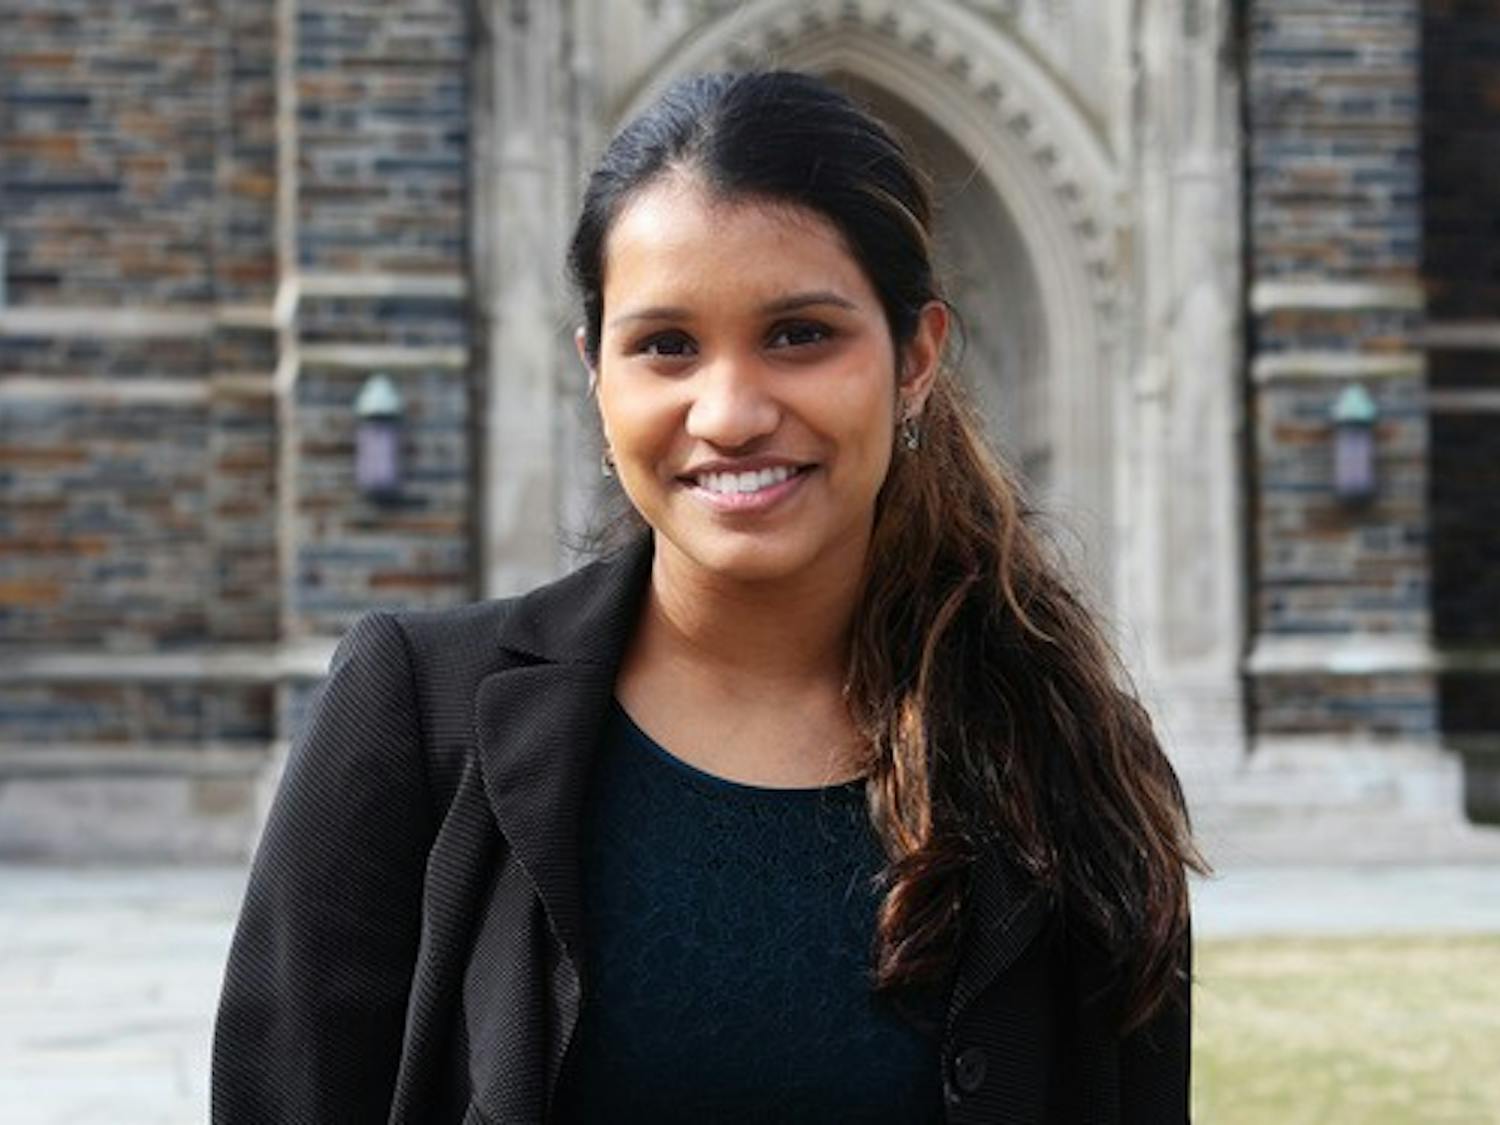 Sophomore Lavanya Sunder became Duke Student Government with 63 percent of the student body's vote.